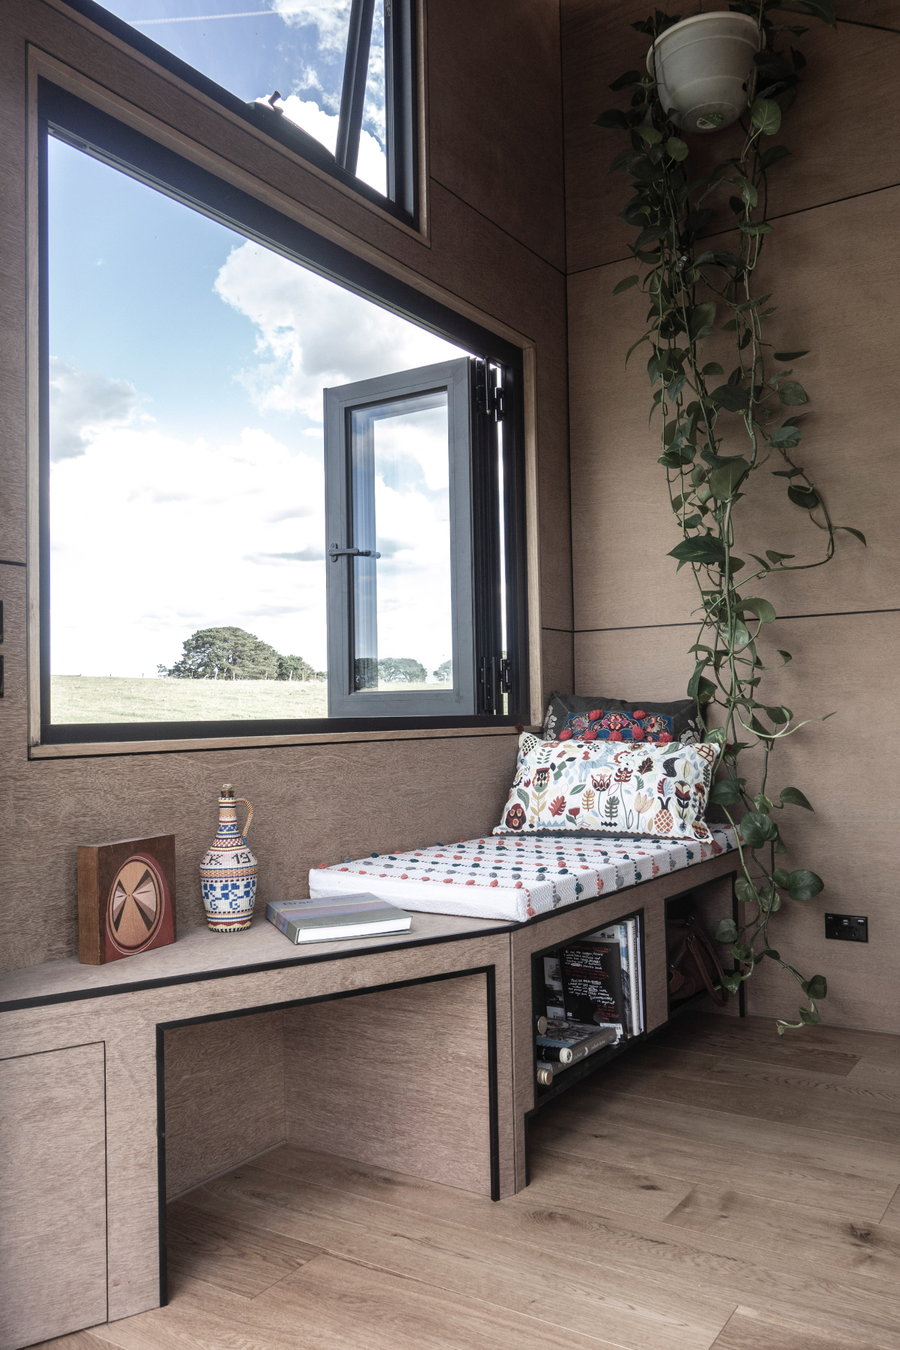 The inside of the Base Cabin is simple and cozy, featuring a welcoming window seat and lots of plywood. 